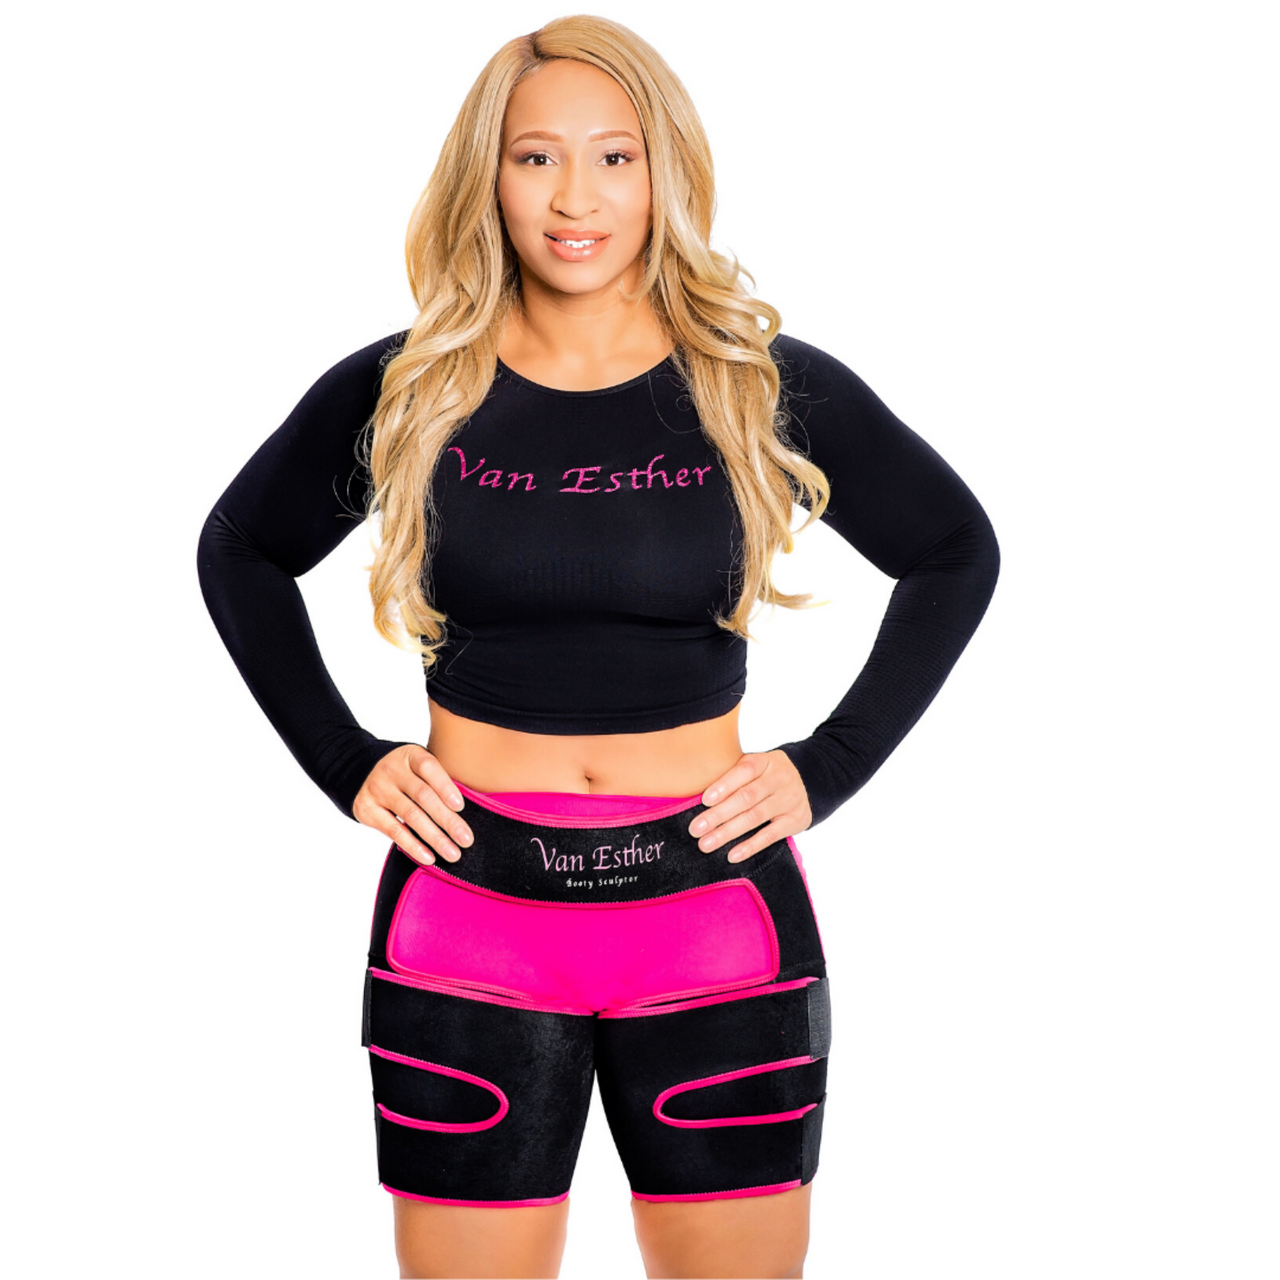 Woman wearing the Black and Pink Van Esther Glute Sculptor/ Thigh Trimmers